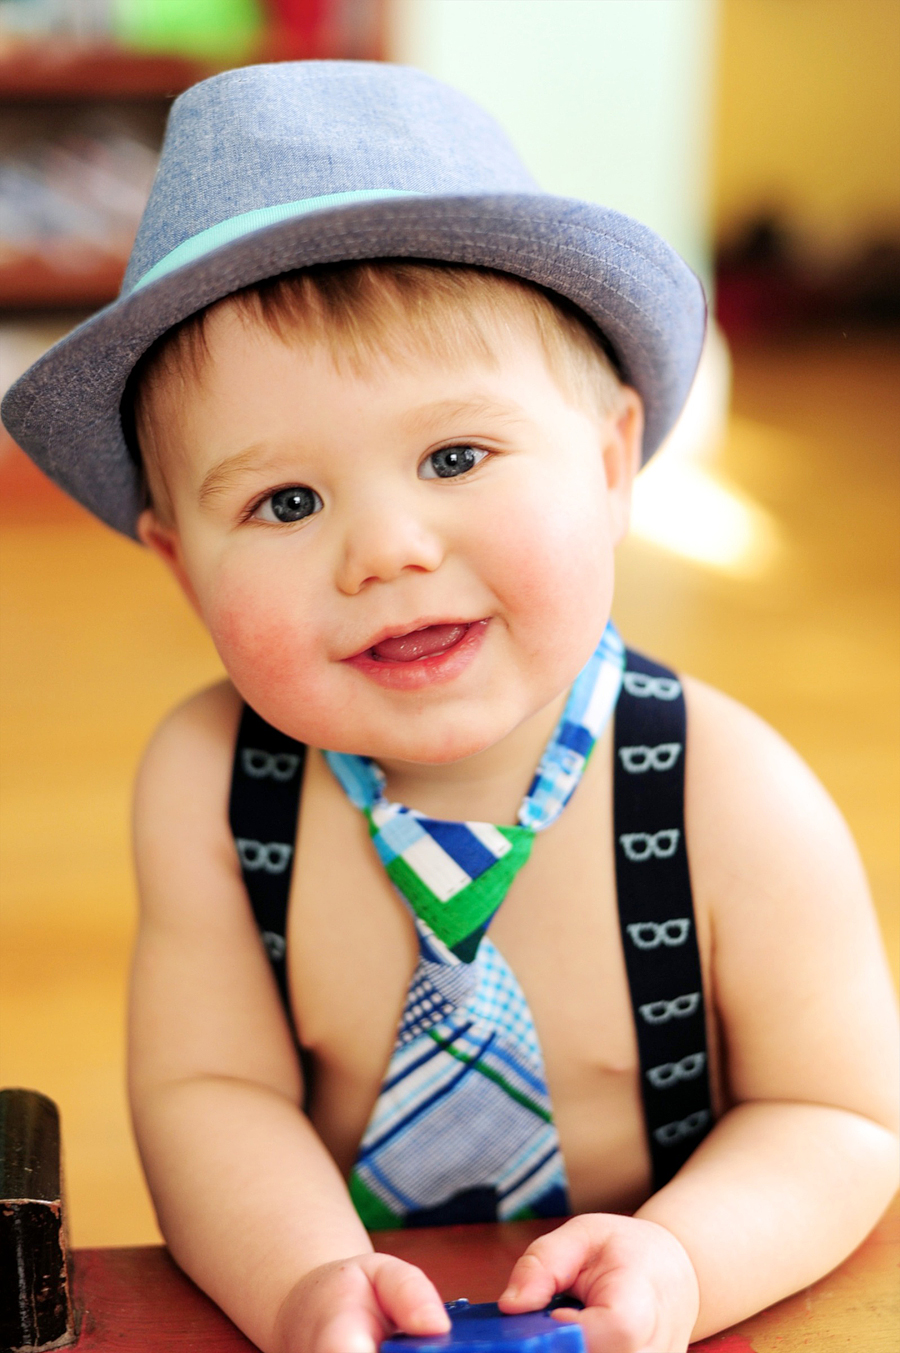 smiling baby in hat and tie